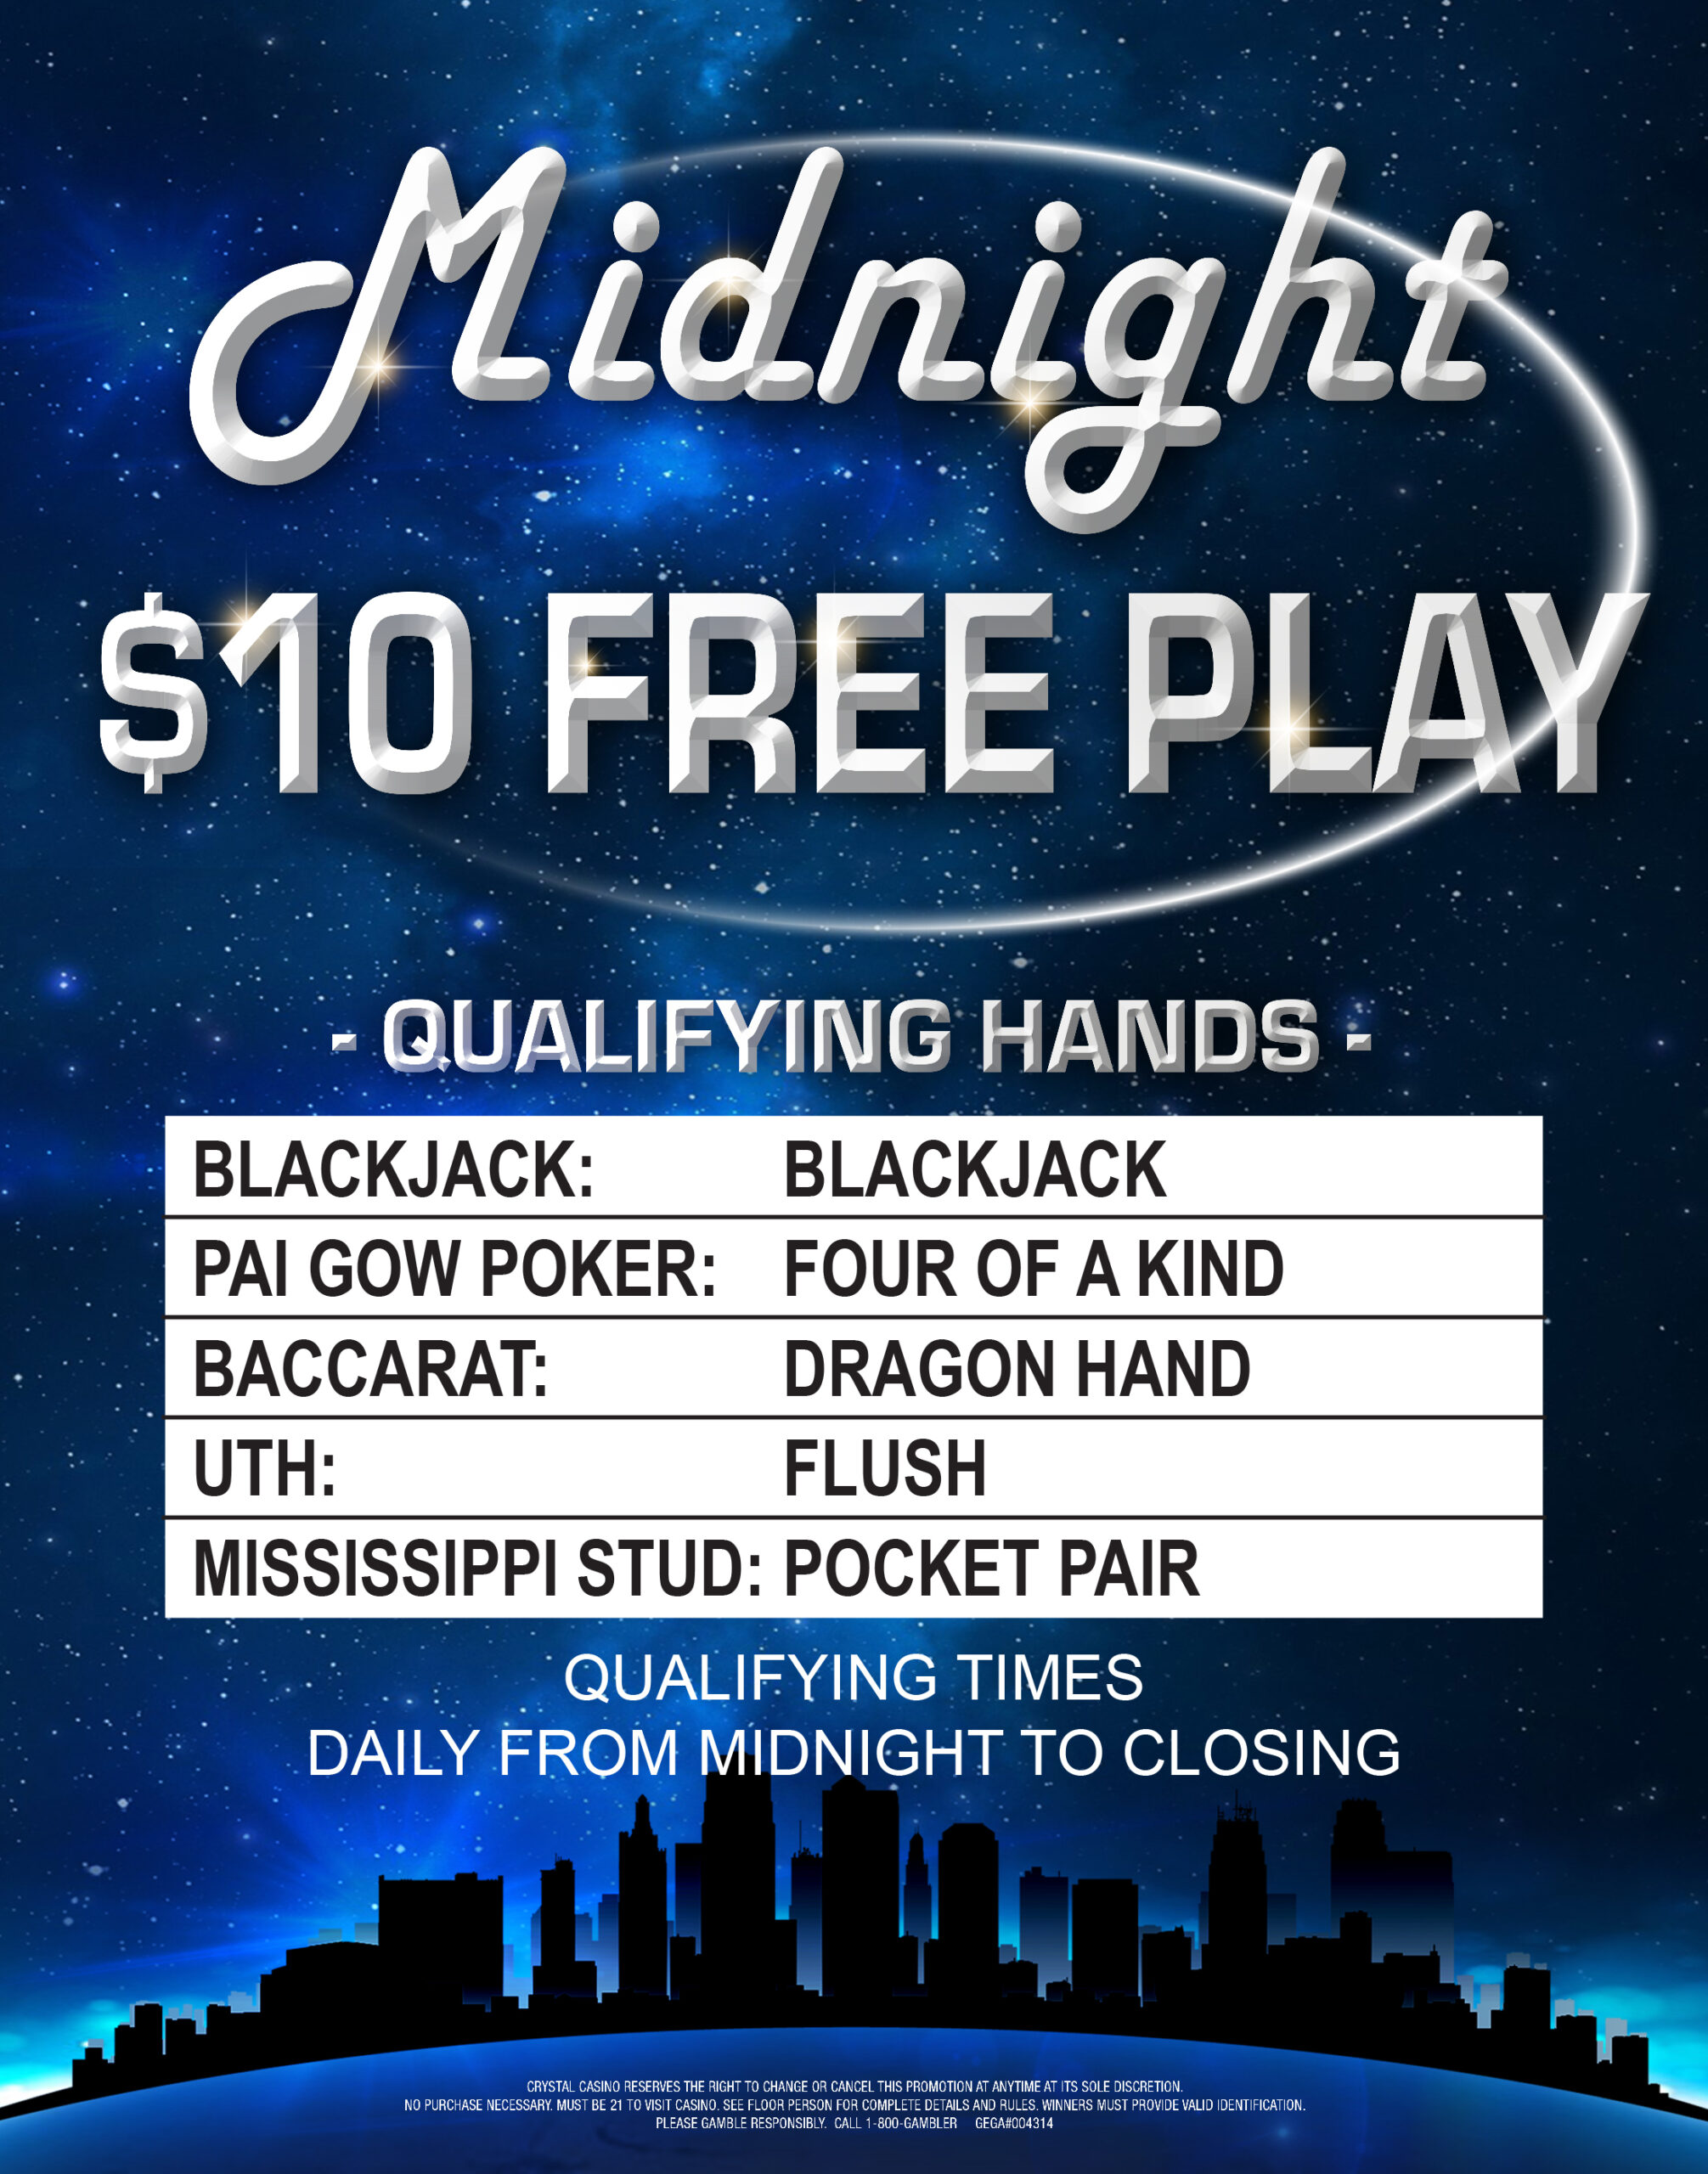 Get $10 FREE PLAY with qualifying hands. 12am to 4am Daily